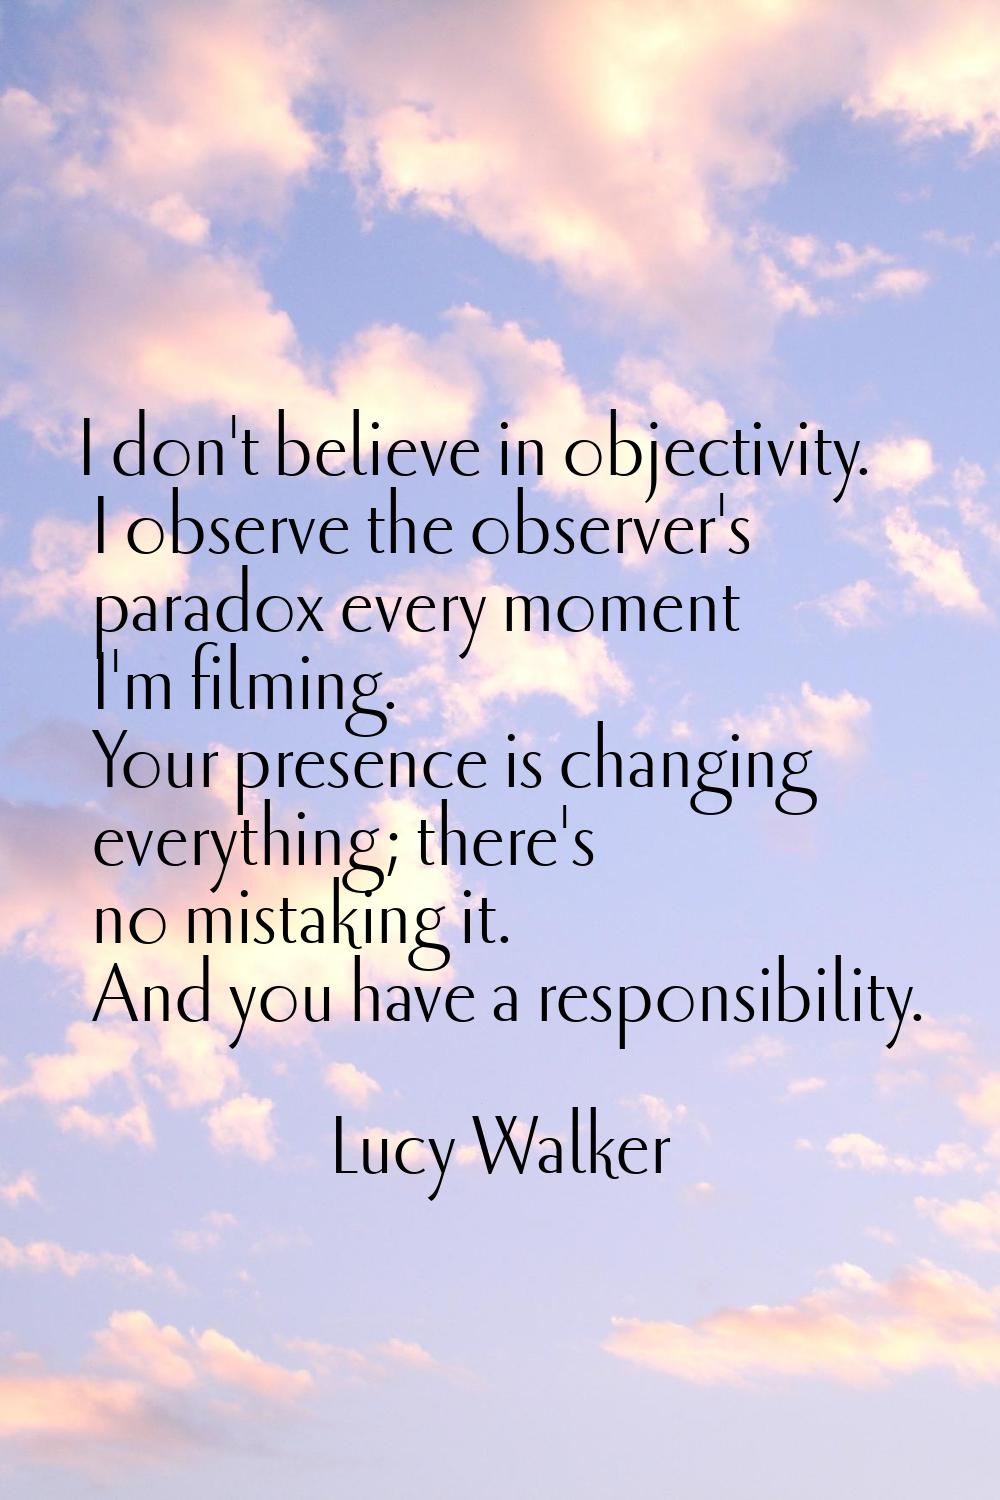 I don't believe in objectivity. I observe the observer's paradox every moment I'm filming. Your pre